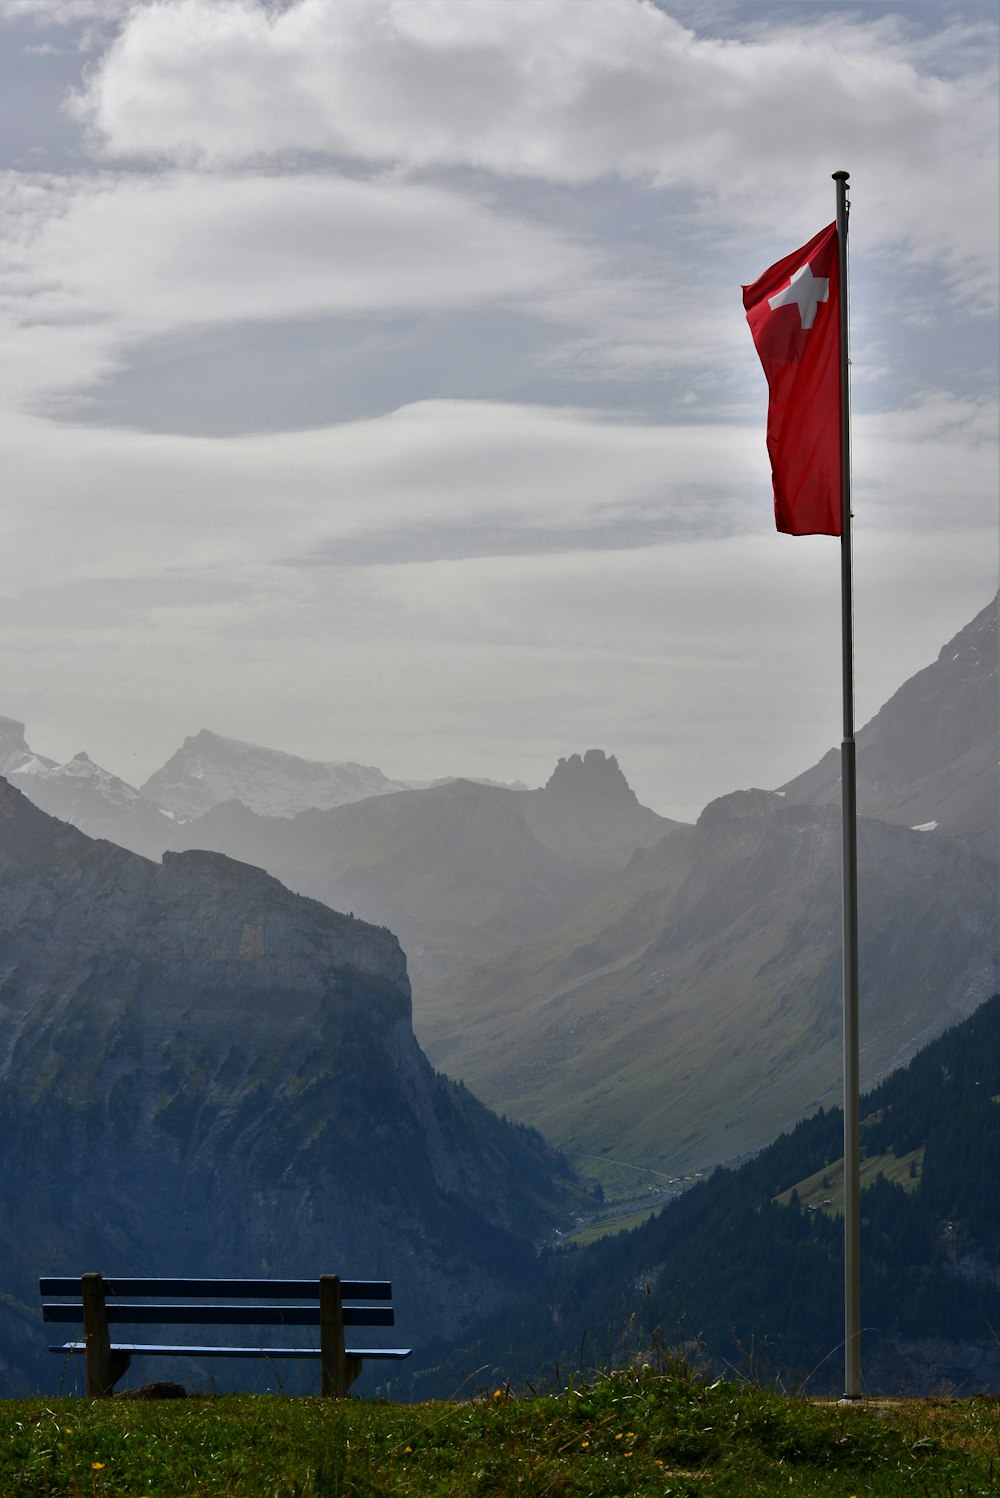 red flag on pole on top of the mountain